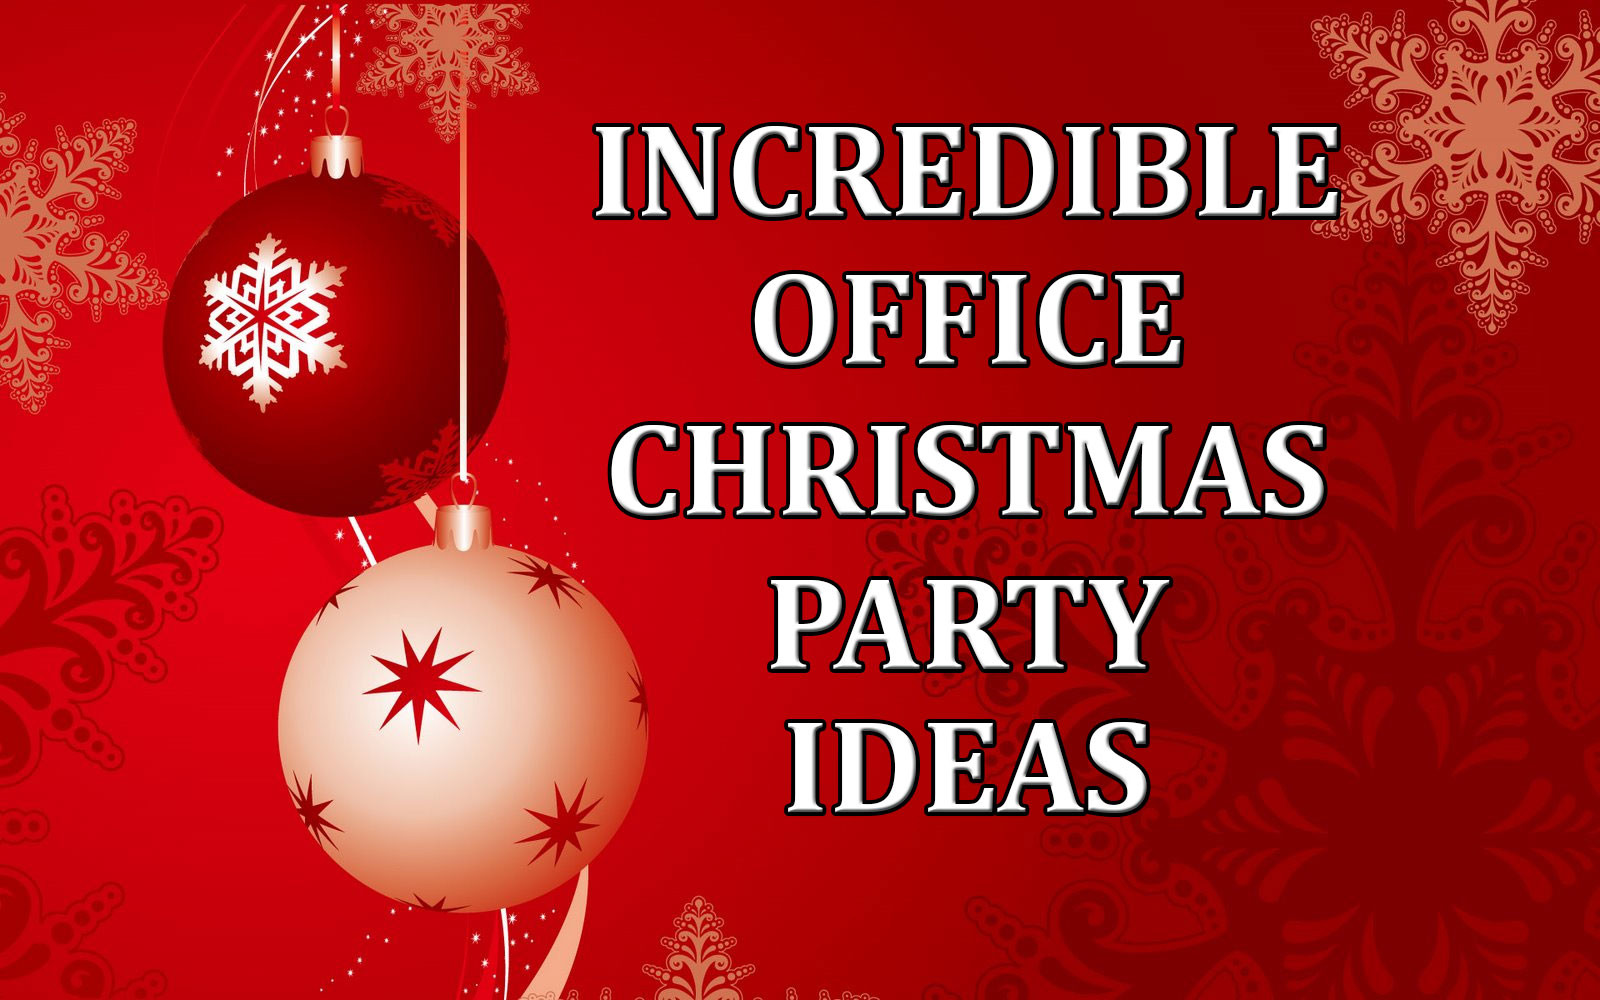 Office Holiday Party Ideas
 Incredible fice Christmas Party Ideas edy Ventriloquist